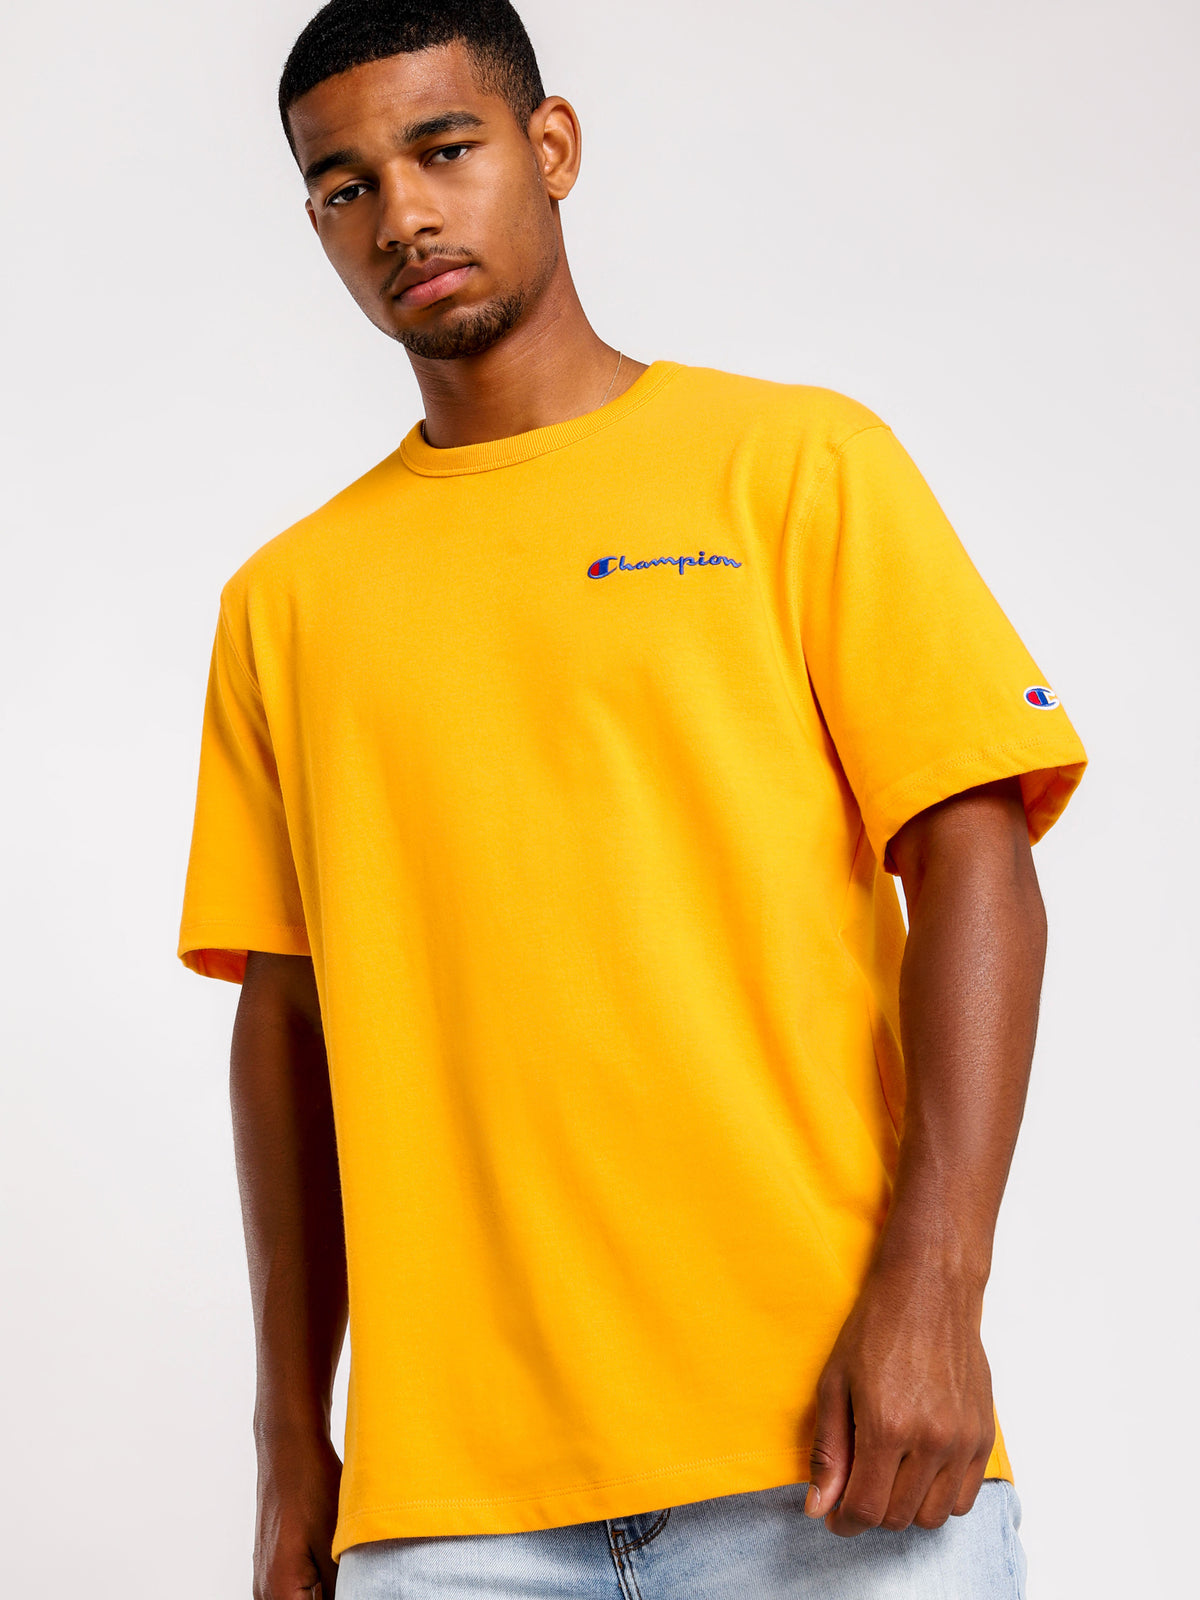 Heritage Short Sleeve T-Shirt in Gold